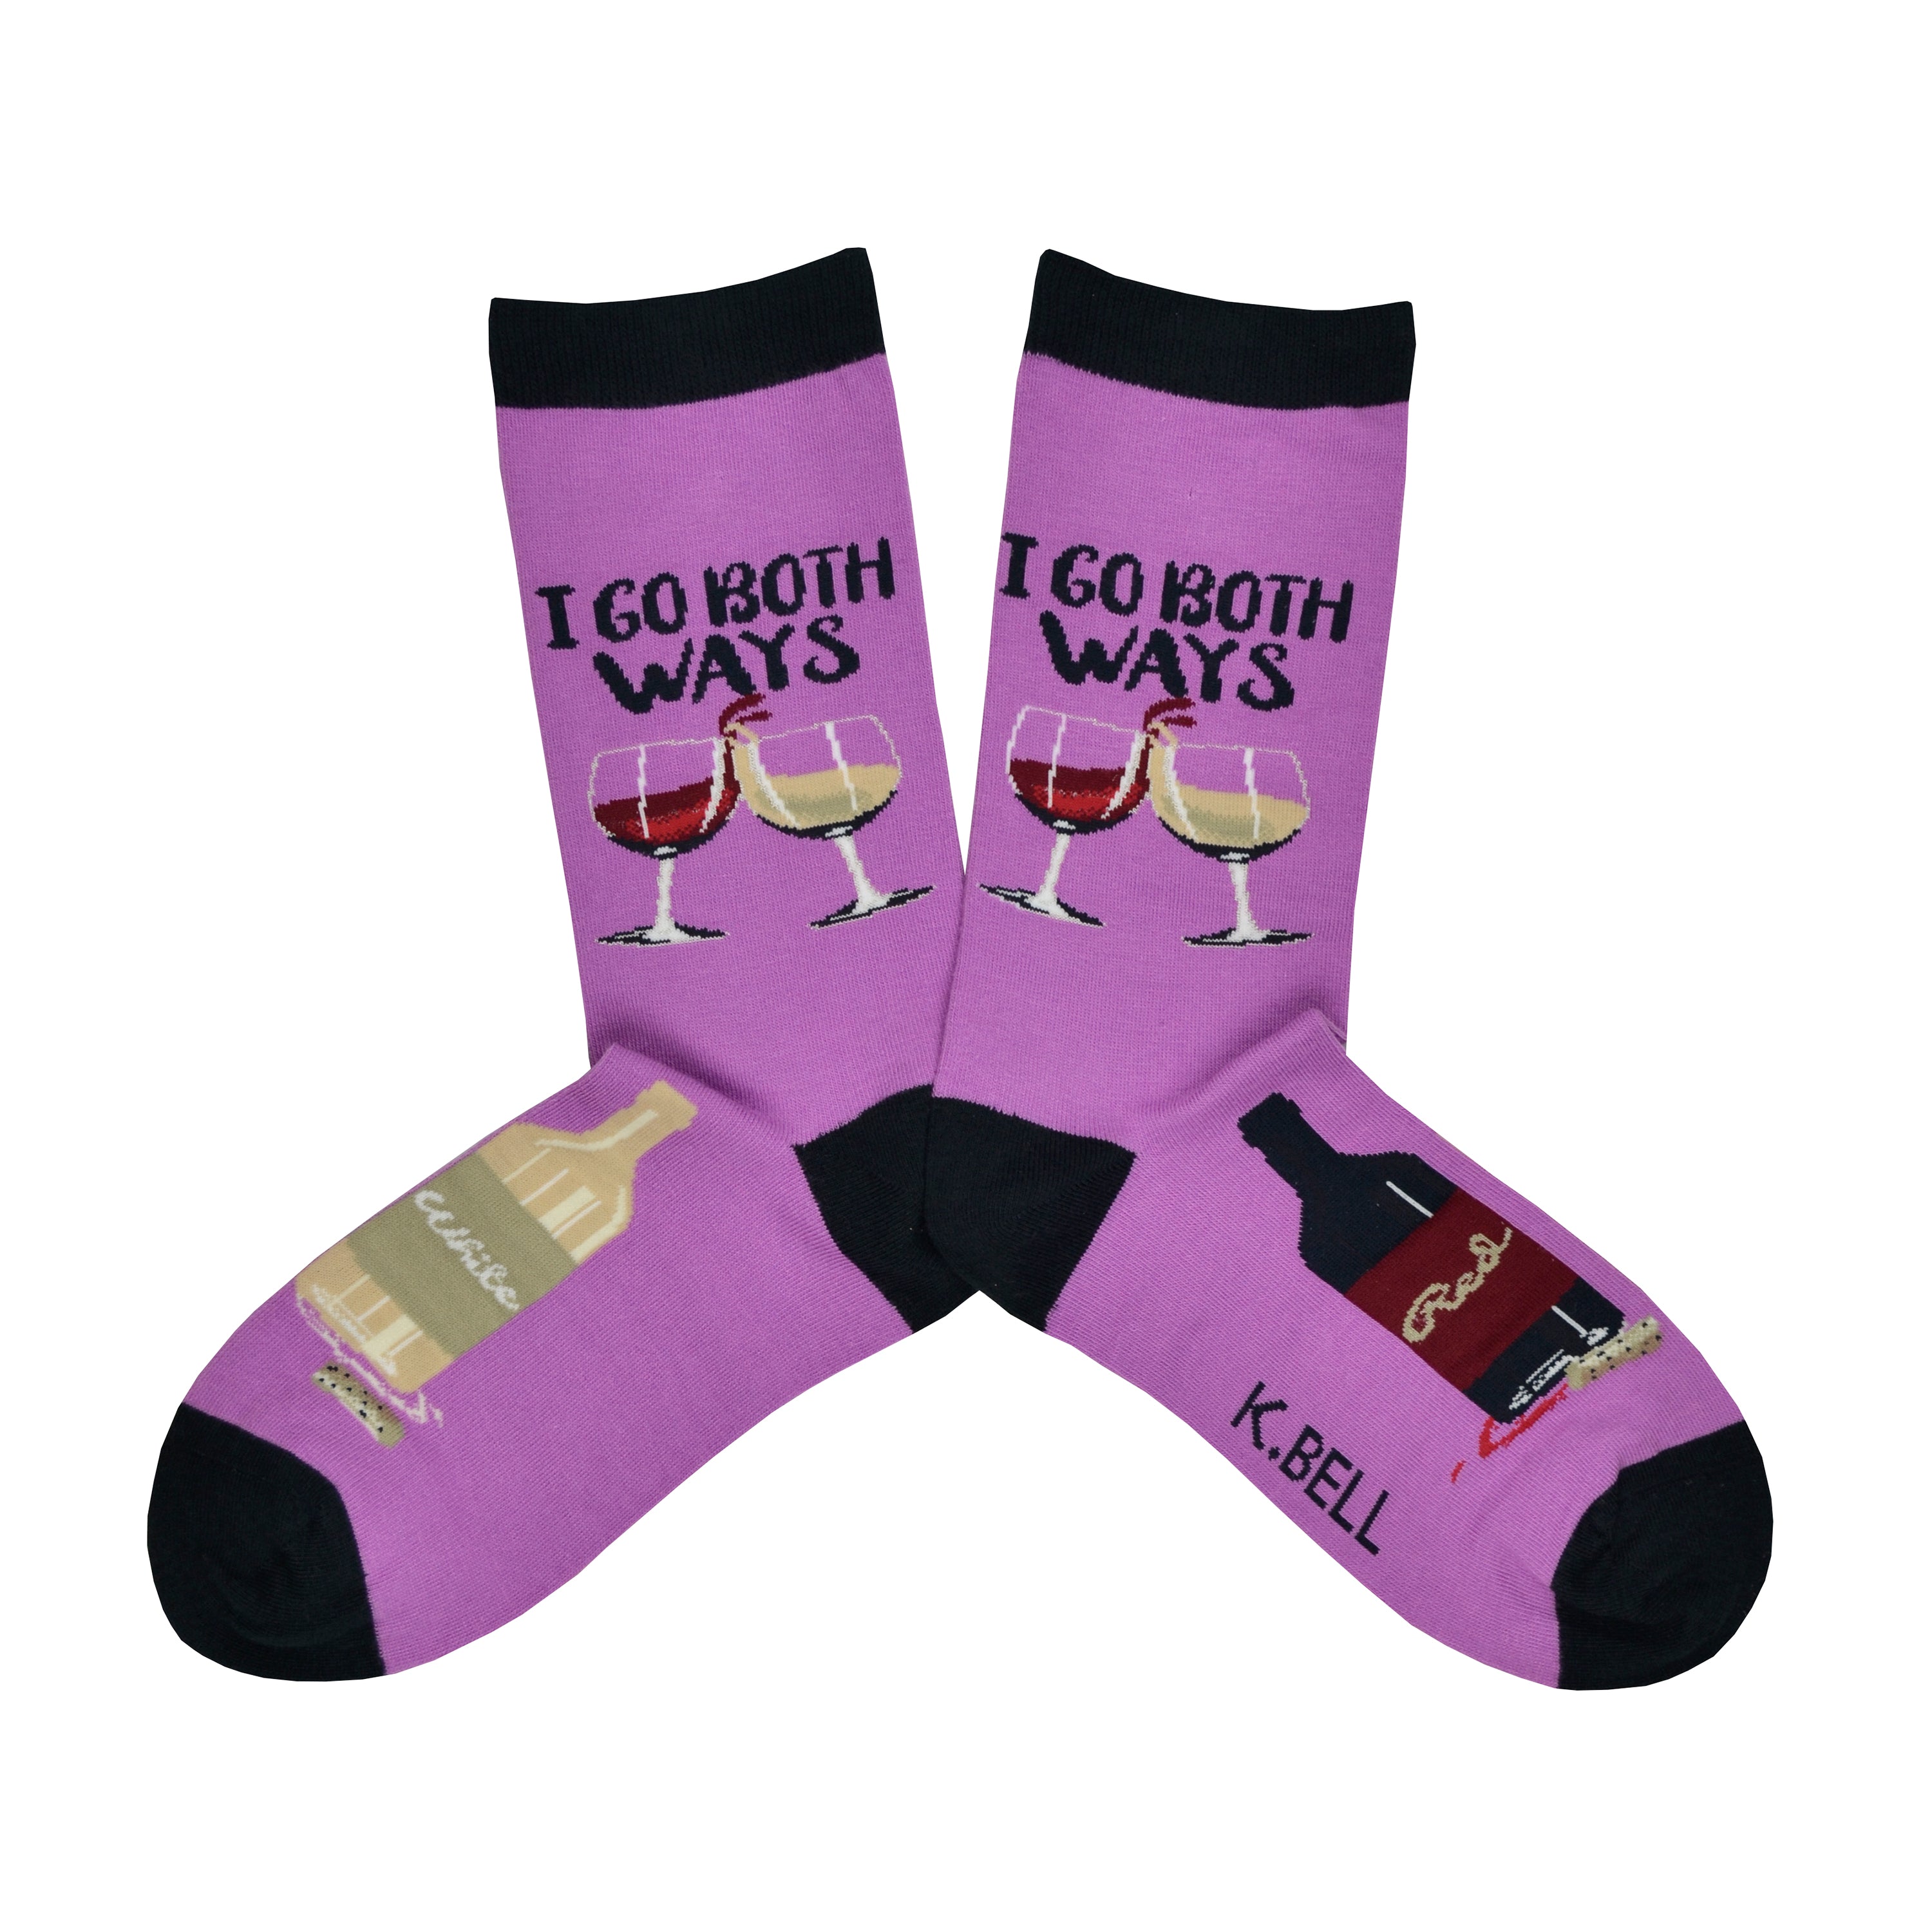 Cotton blend women's purple socks with a black heel, toe, and cuff shown in a flatlay. These socks feature calf design of two glasses of wine, one red and one white, with the words, 